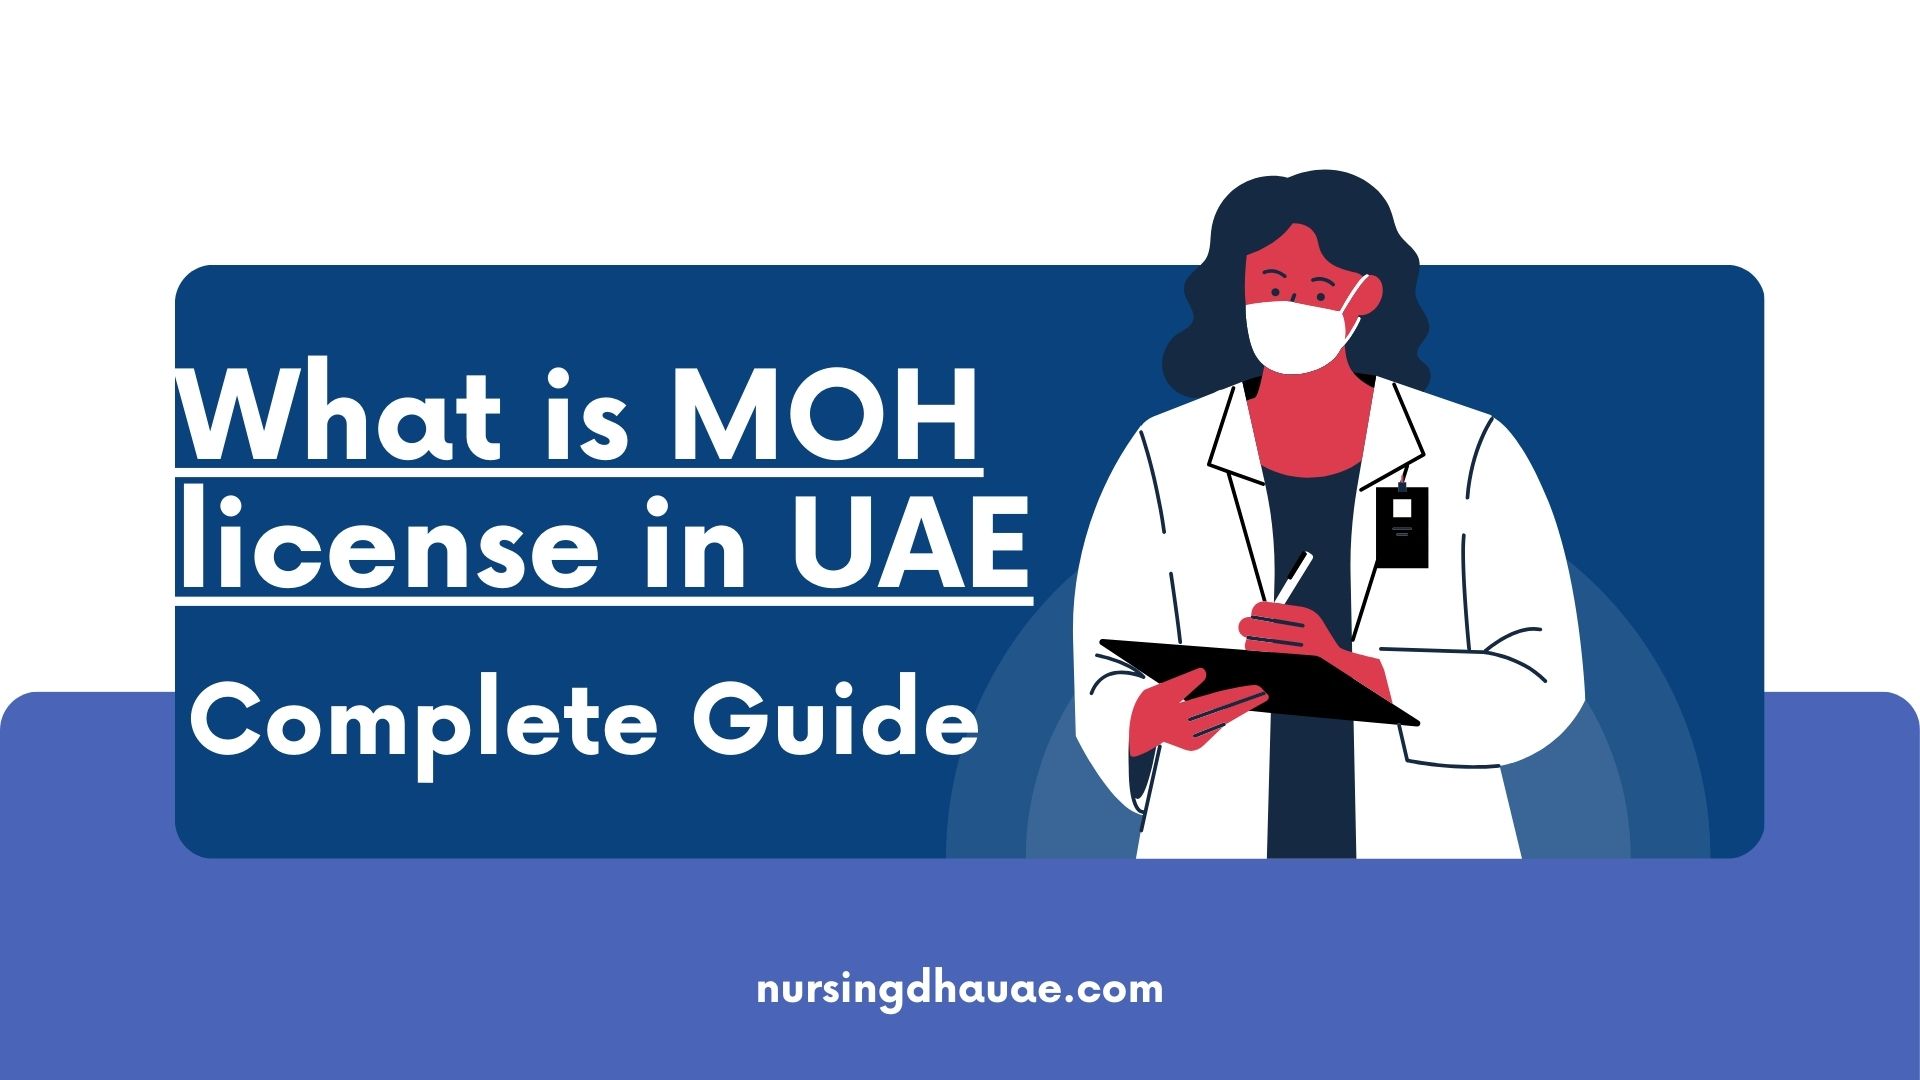 What is MOH license in UAE